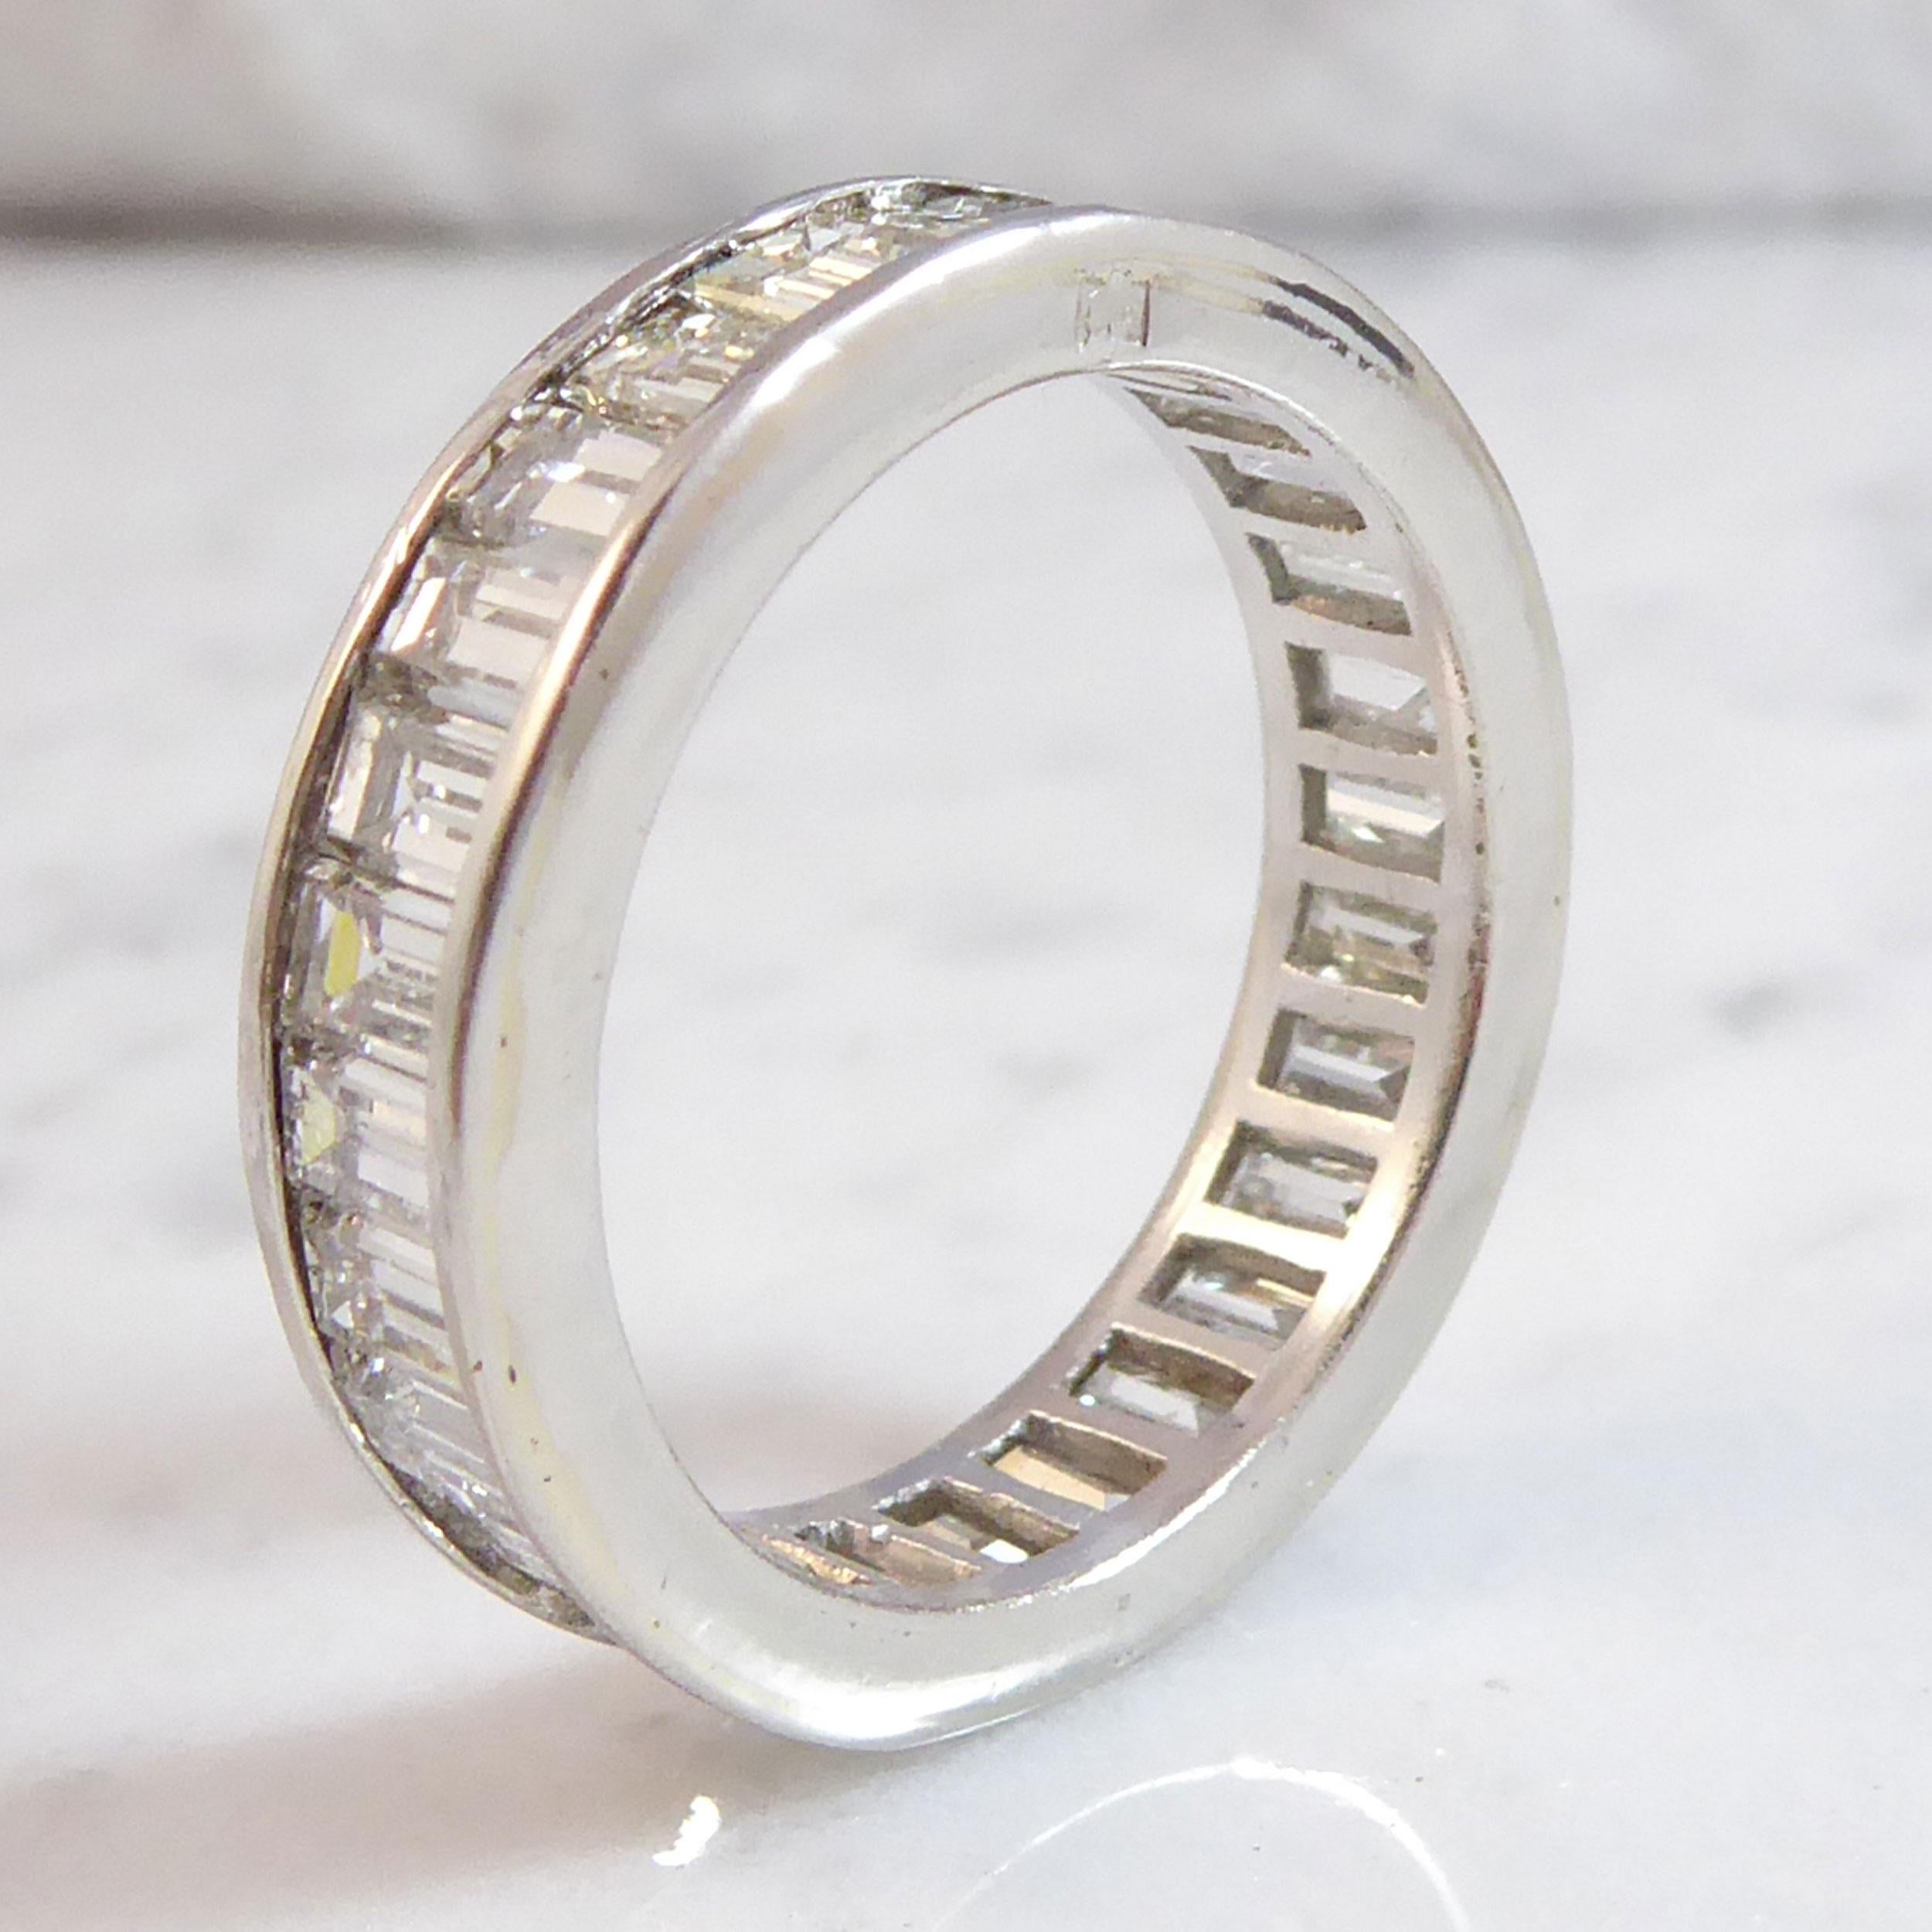 4.0 Carat Diamond Eternity Wedding Ring, Baguette Cut Diamonds, White Gold In Good Condition In Yorkshire, West Yorkshire